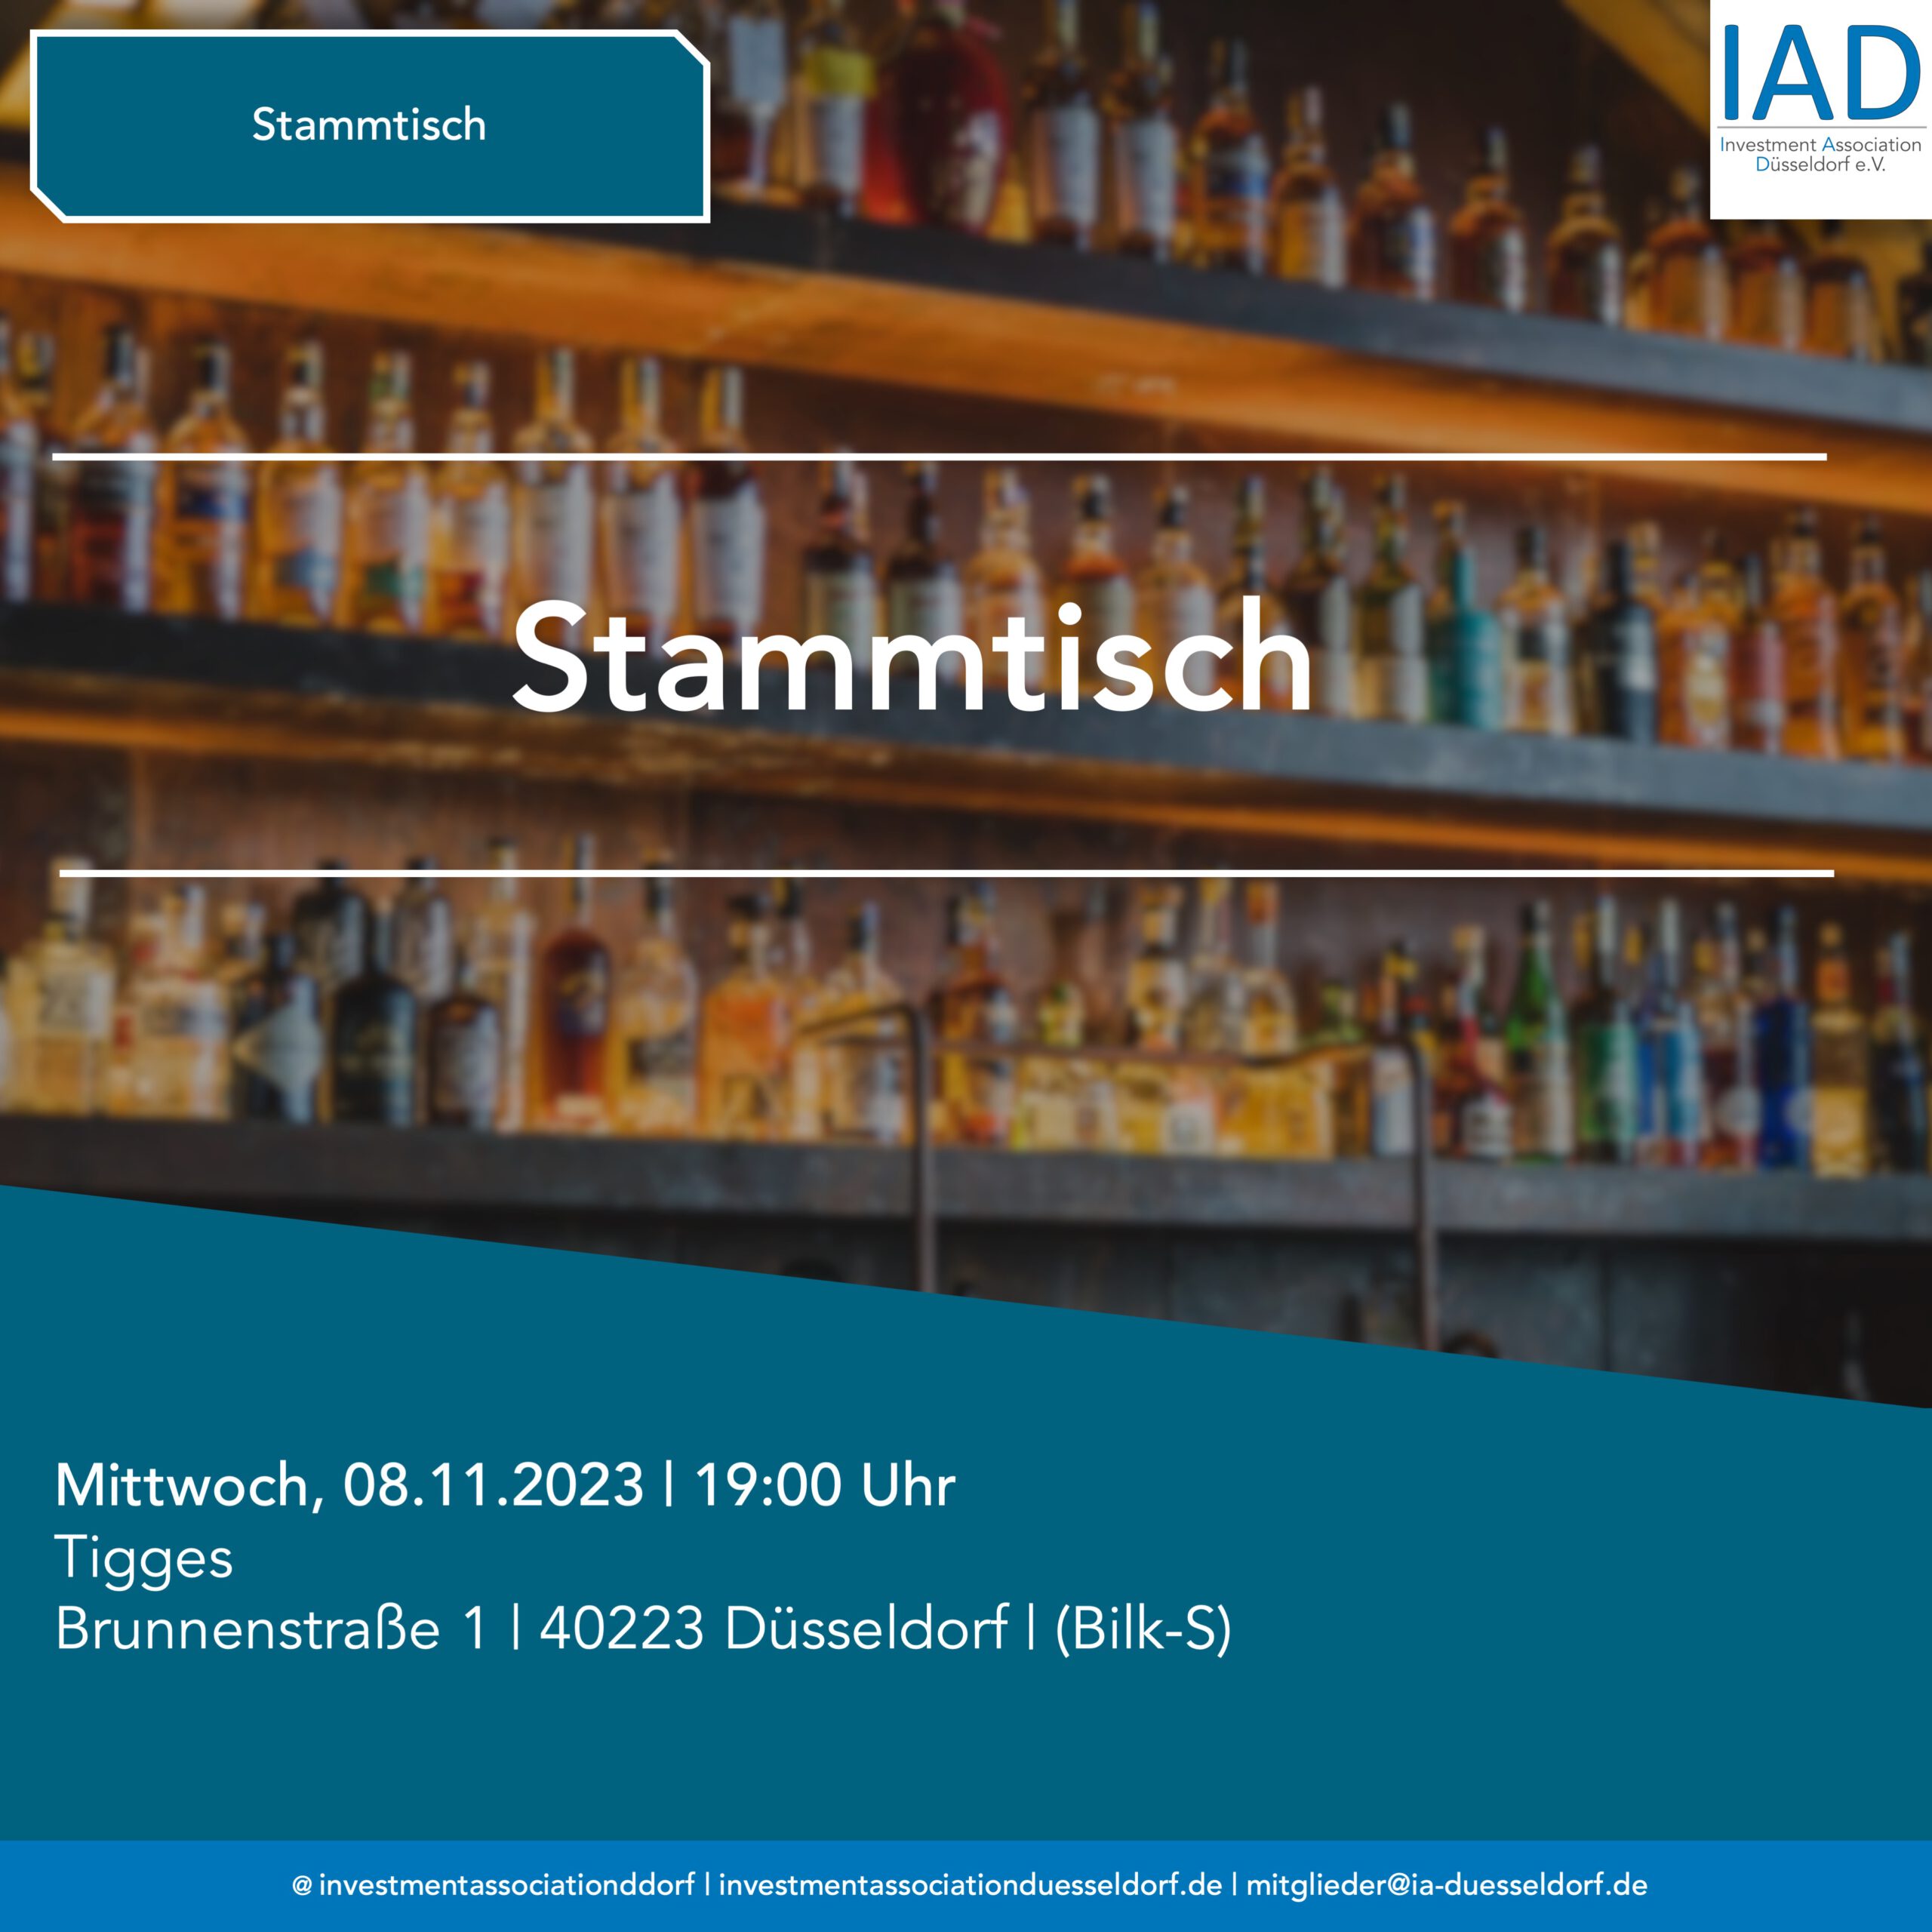 You are currently viewing IAD-Stammtisch (08.11.2023 – 19:00 Uhr)